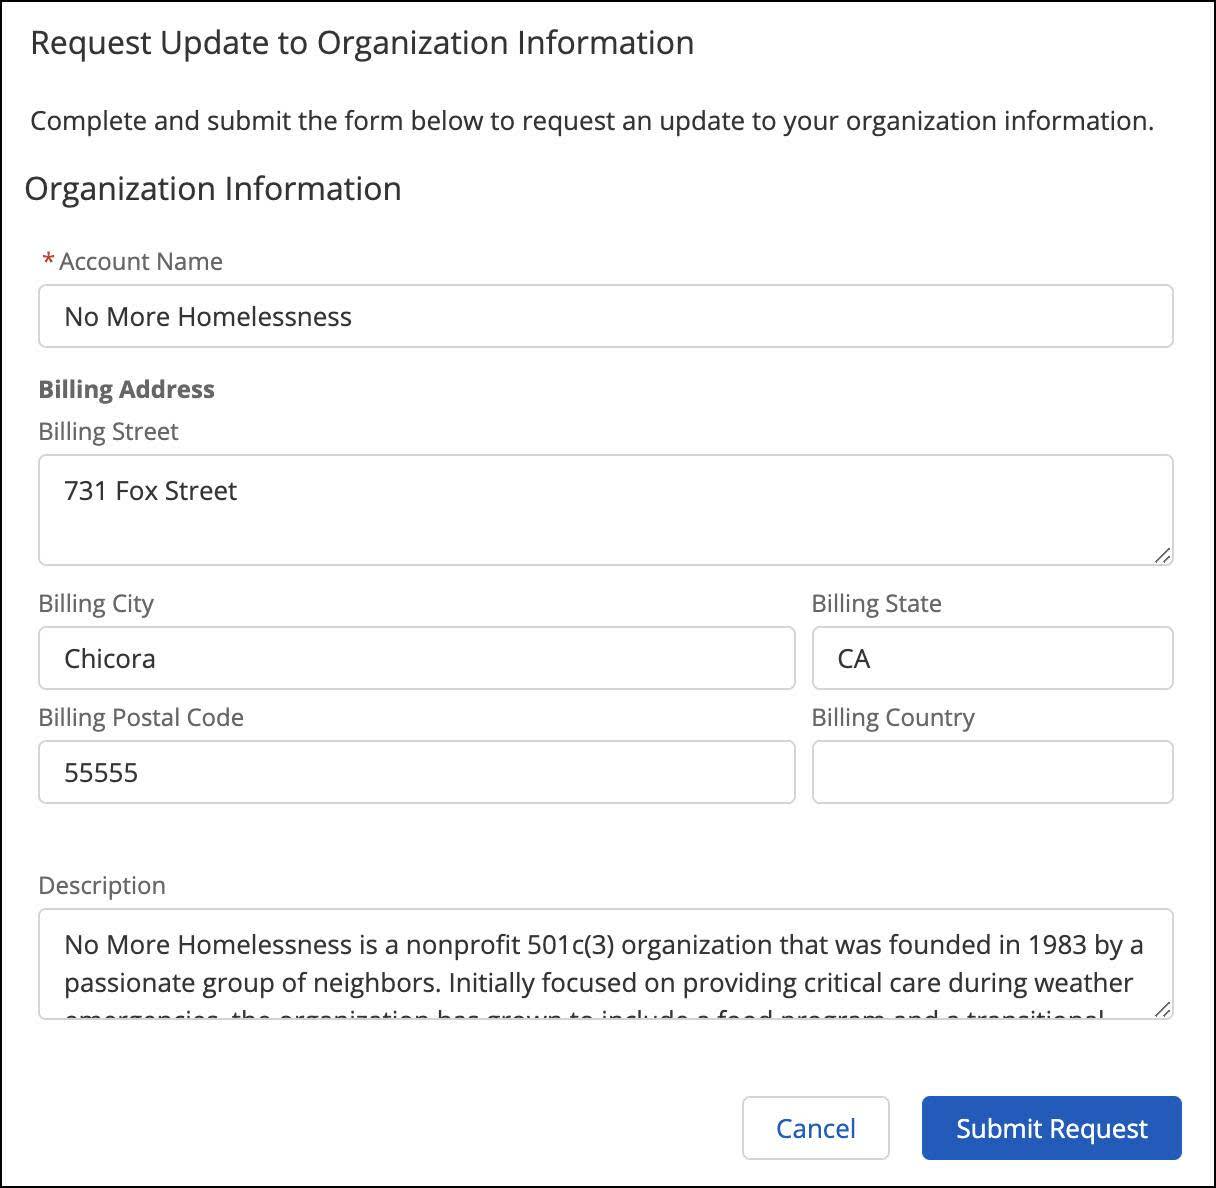 The Request Update to Organization Information form